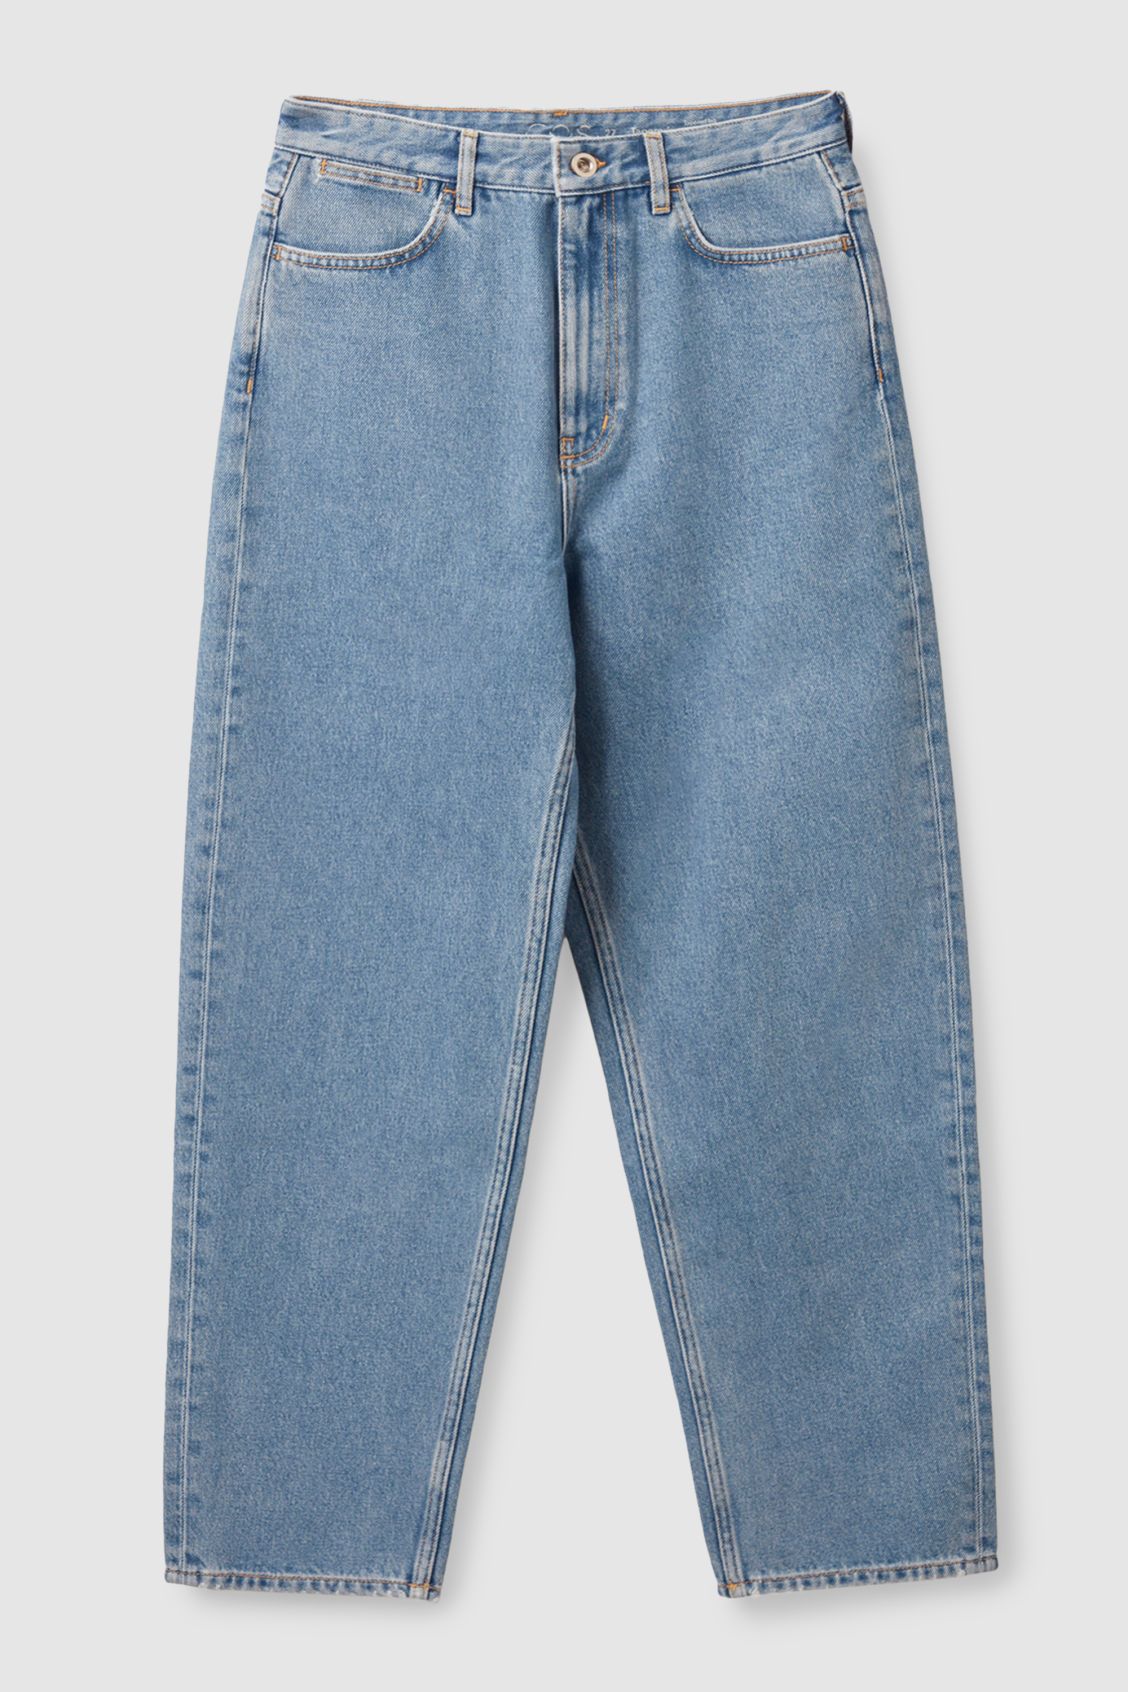 ARCH JEANS - TAPERED - WASHED BLUE - COS | COS UK